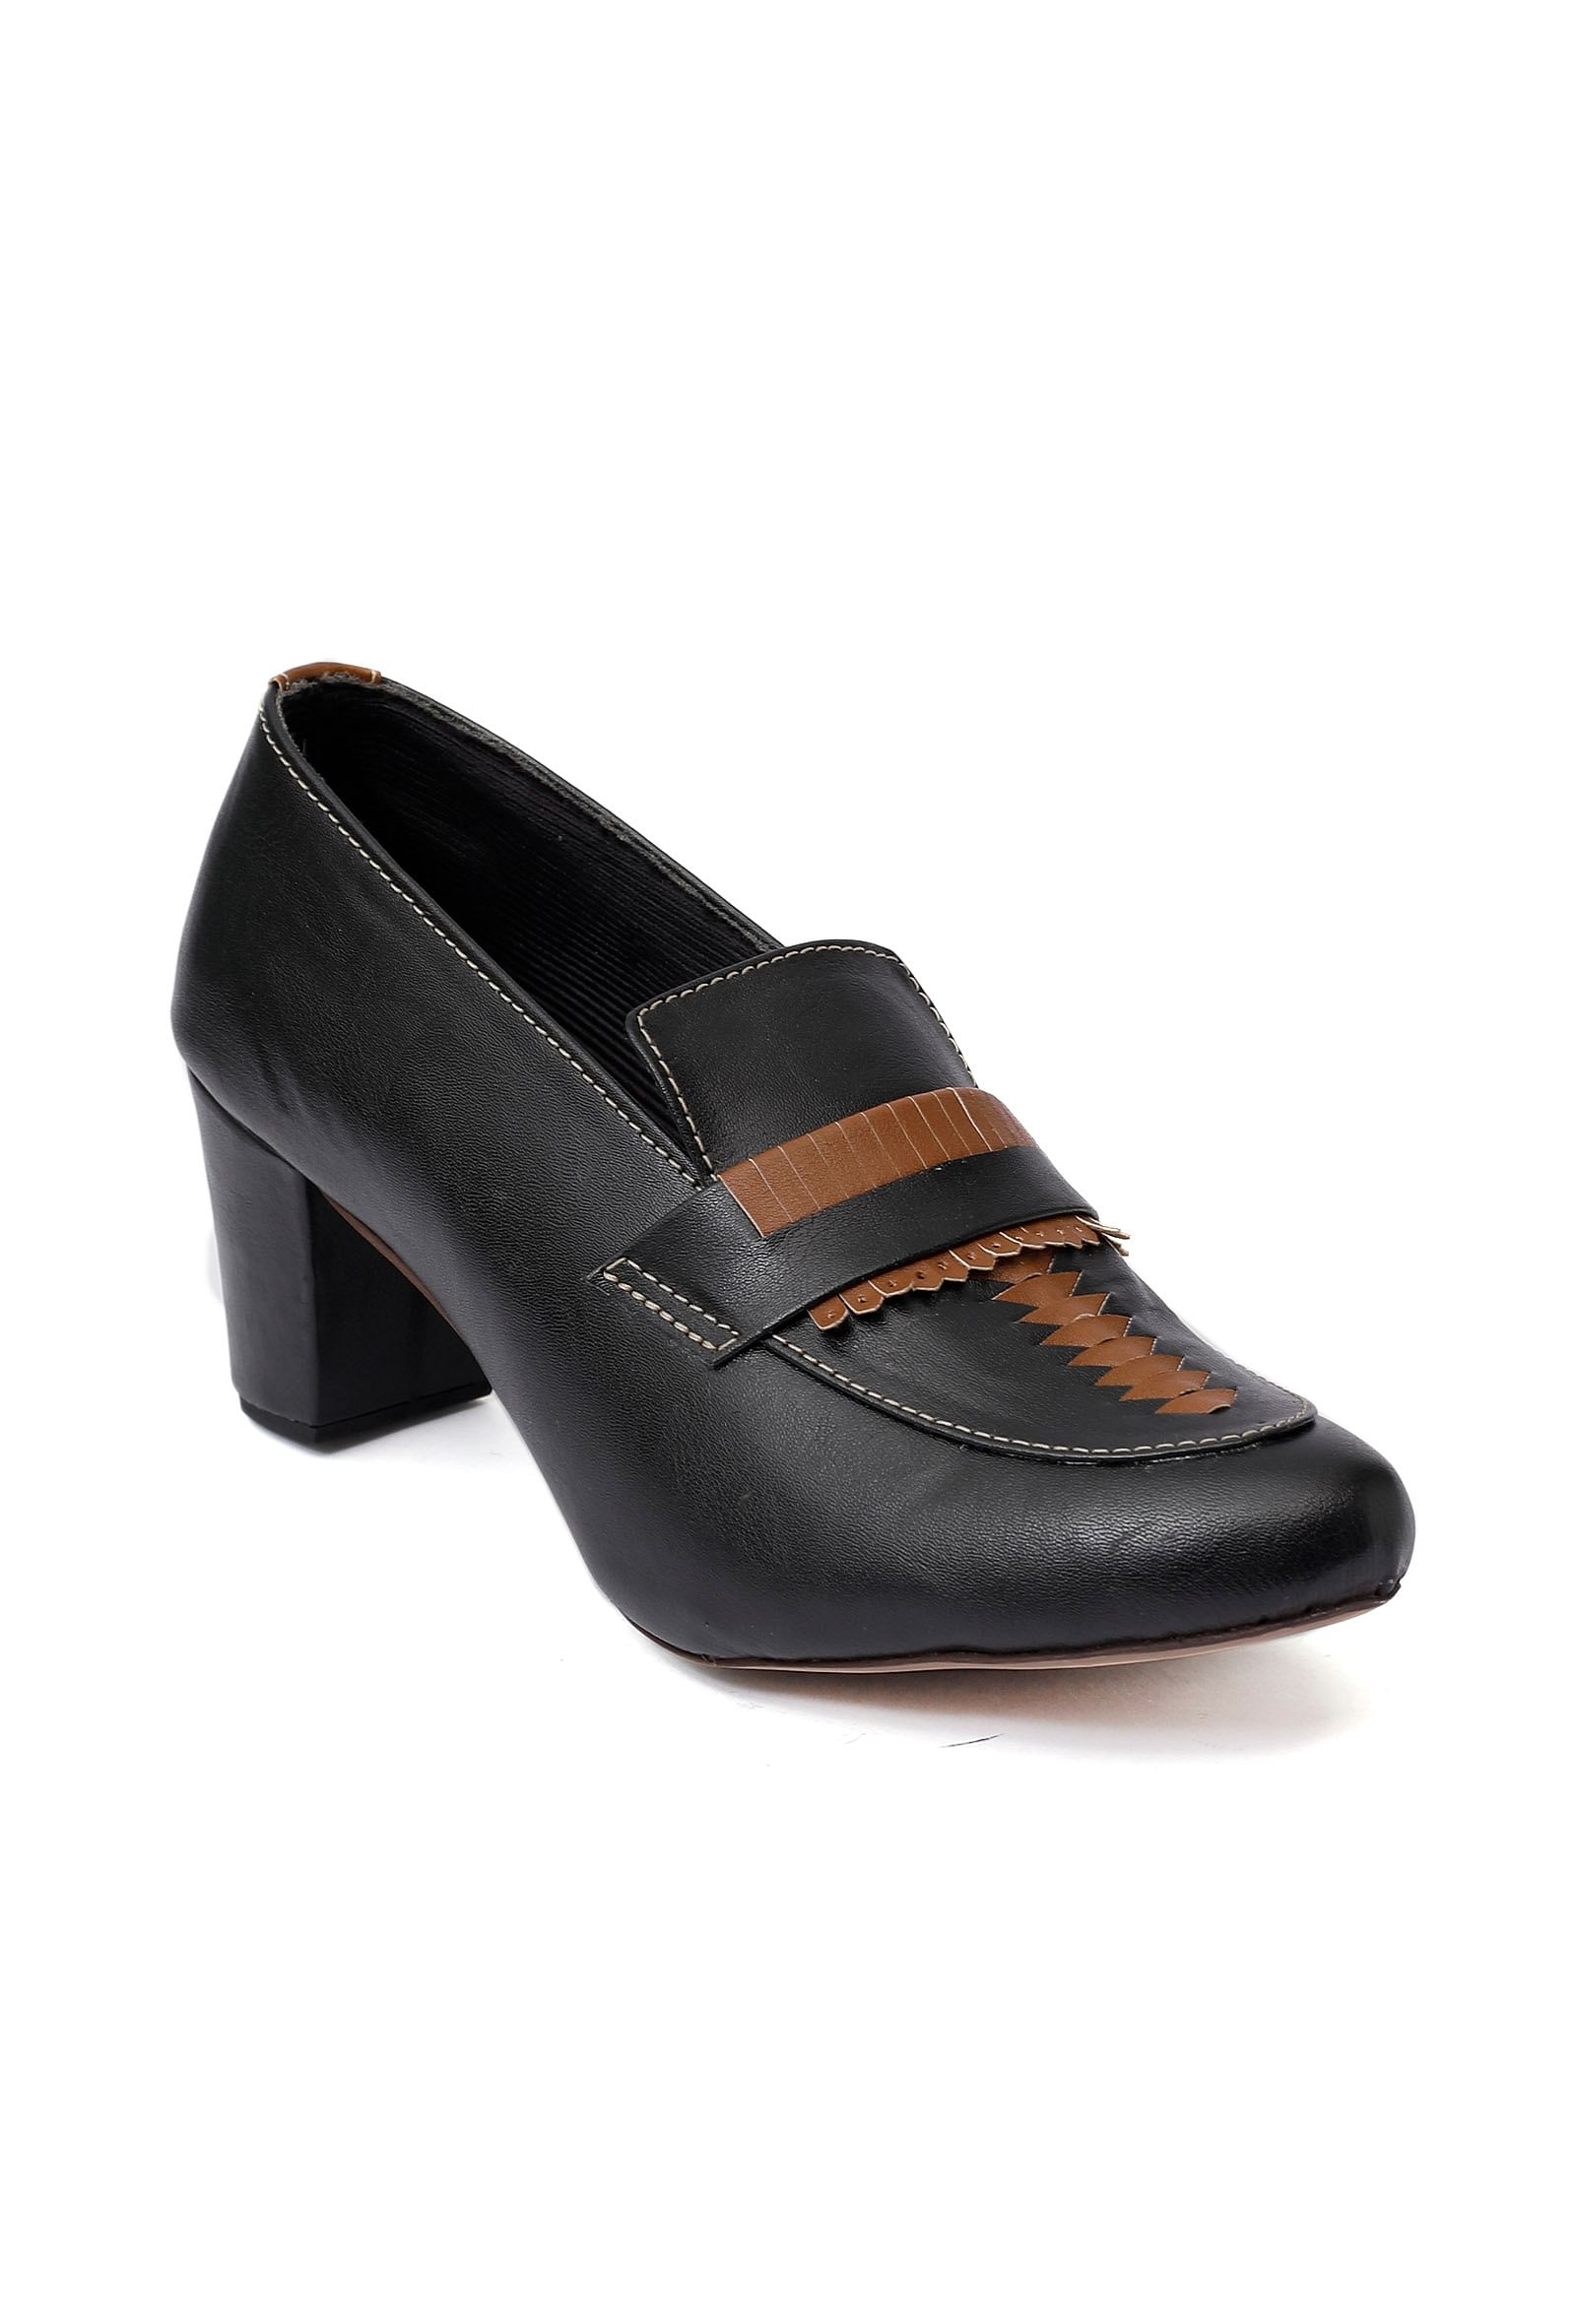 Black Cruelty-Free Leather Loafer Heels